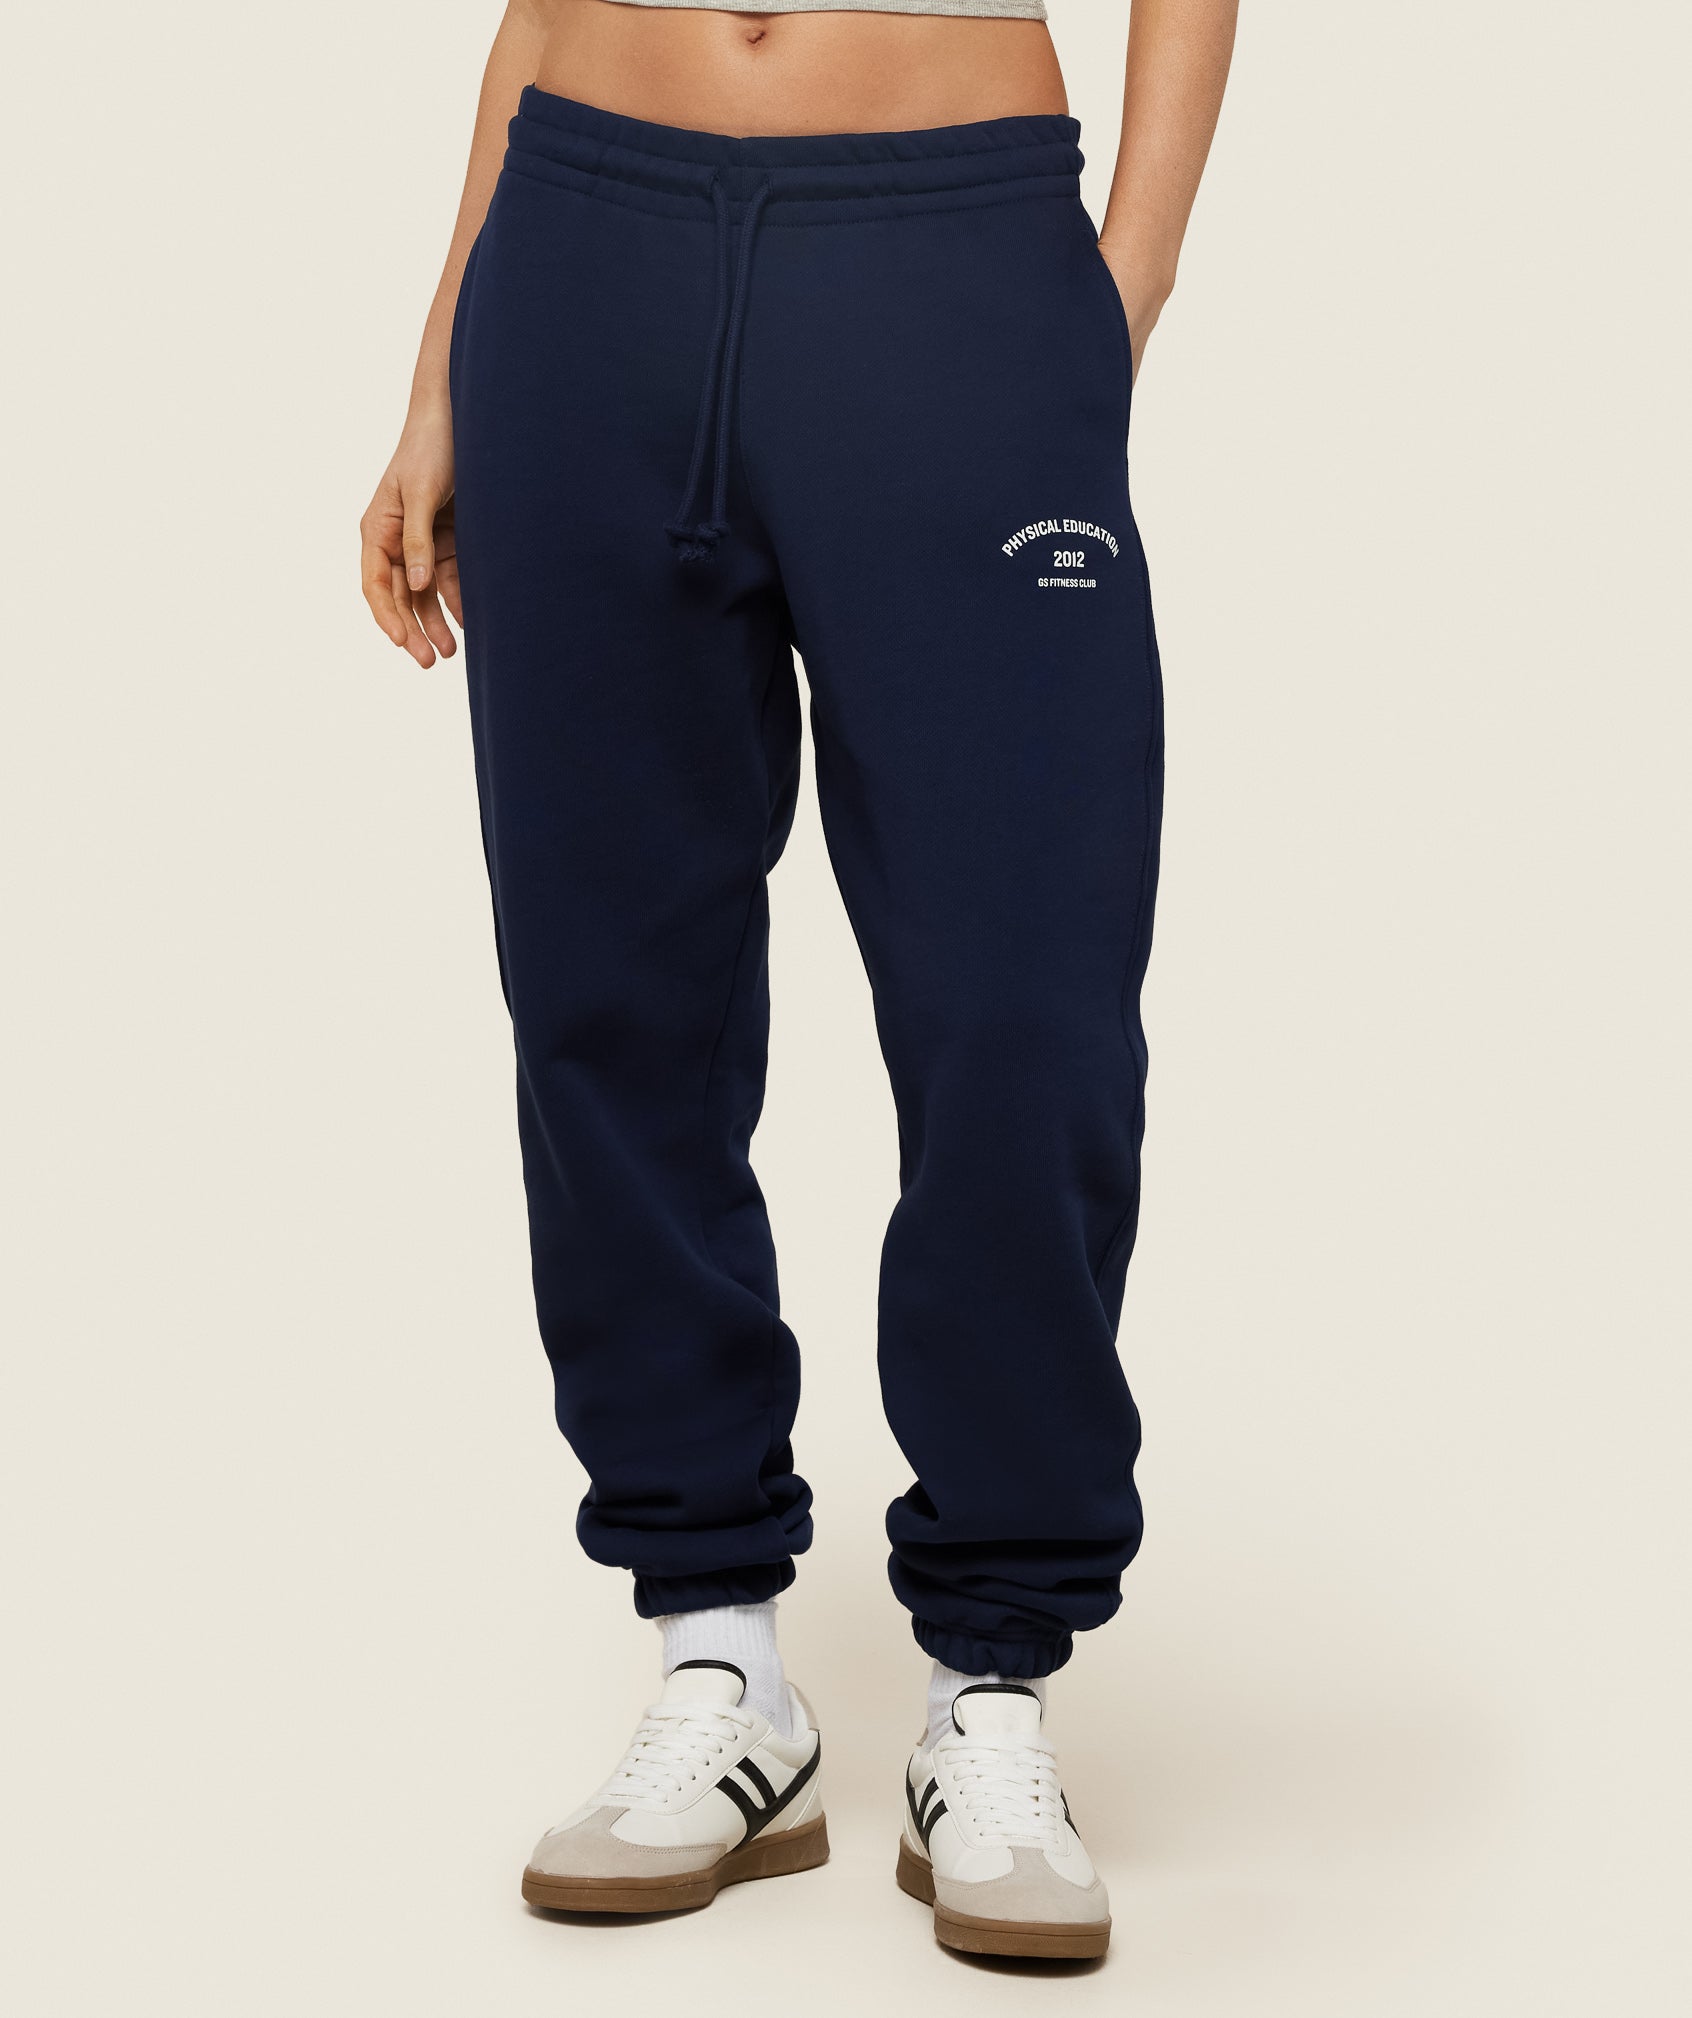 Phys Ed Graphic Sweatpants in Blue